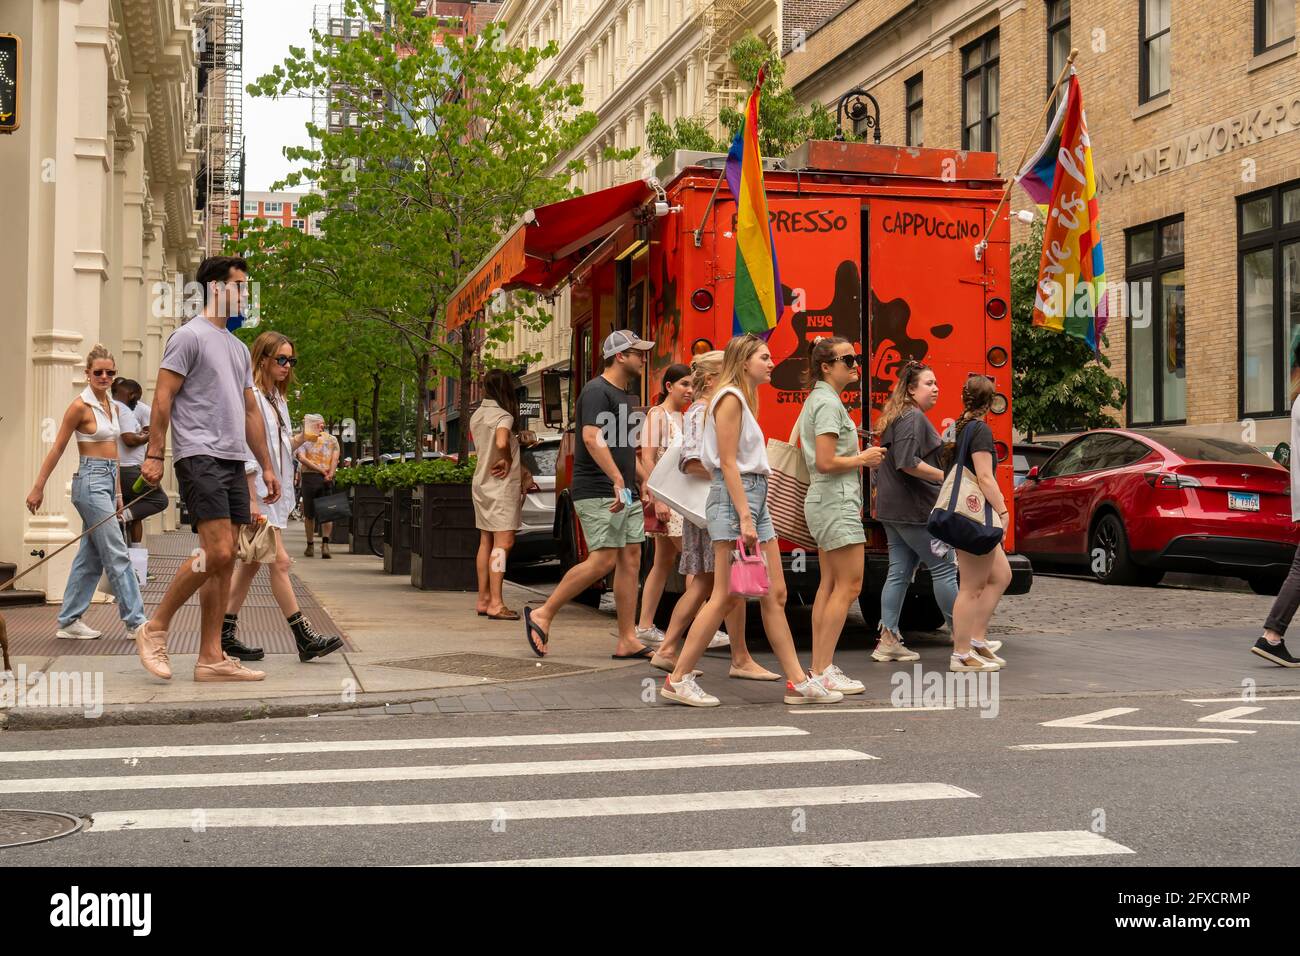 Mostly mask-less people in the Soho neighborhood in New York on Saturday, May 22, 2021. New York has relaxed mask mandates allowing most outdoor activities to be mask free as well as many indoor settings, with caveats. (© Richard B. Levine) Stock Photo